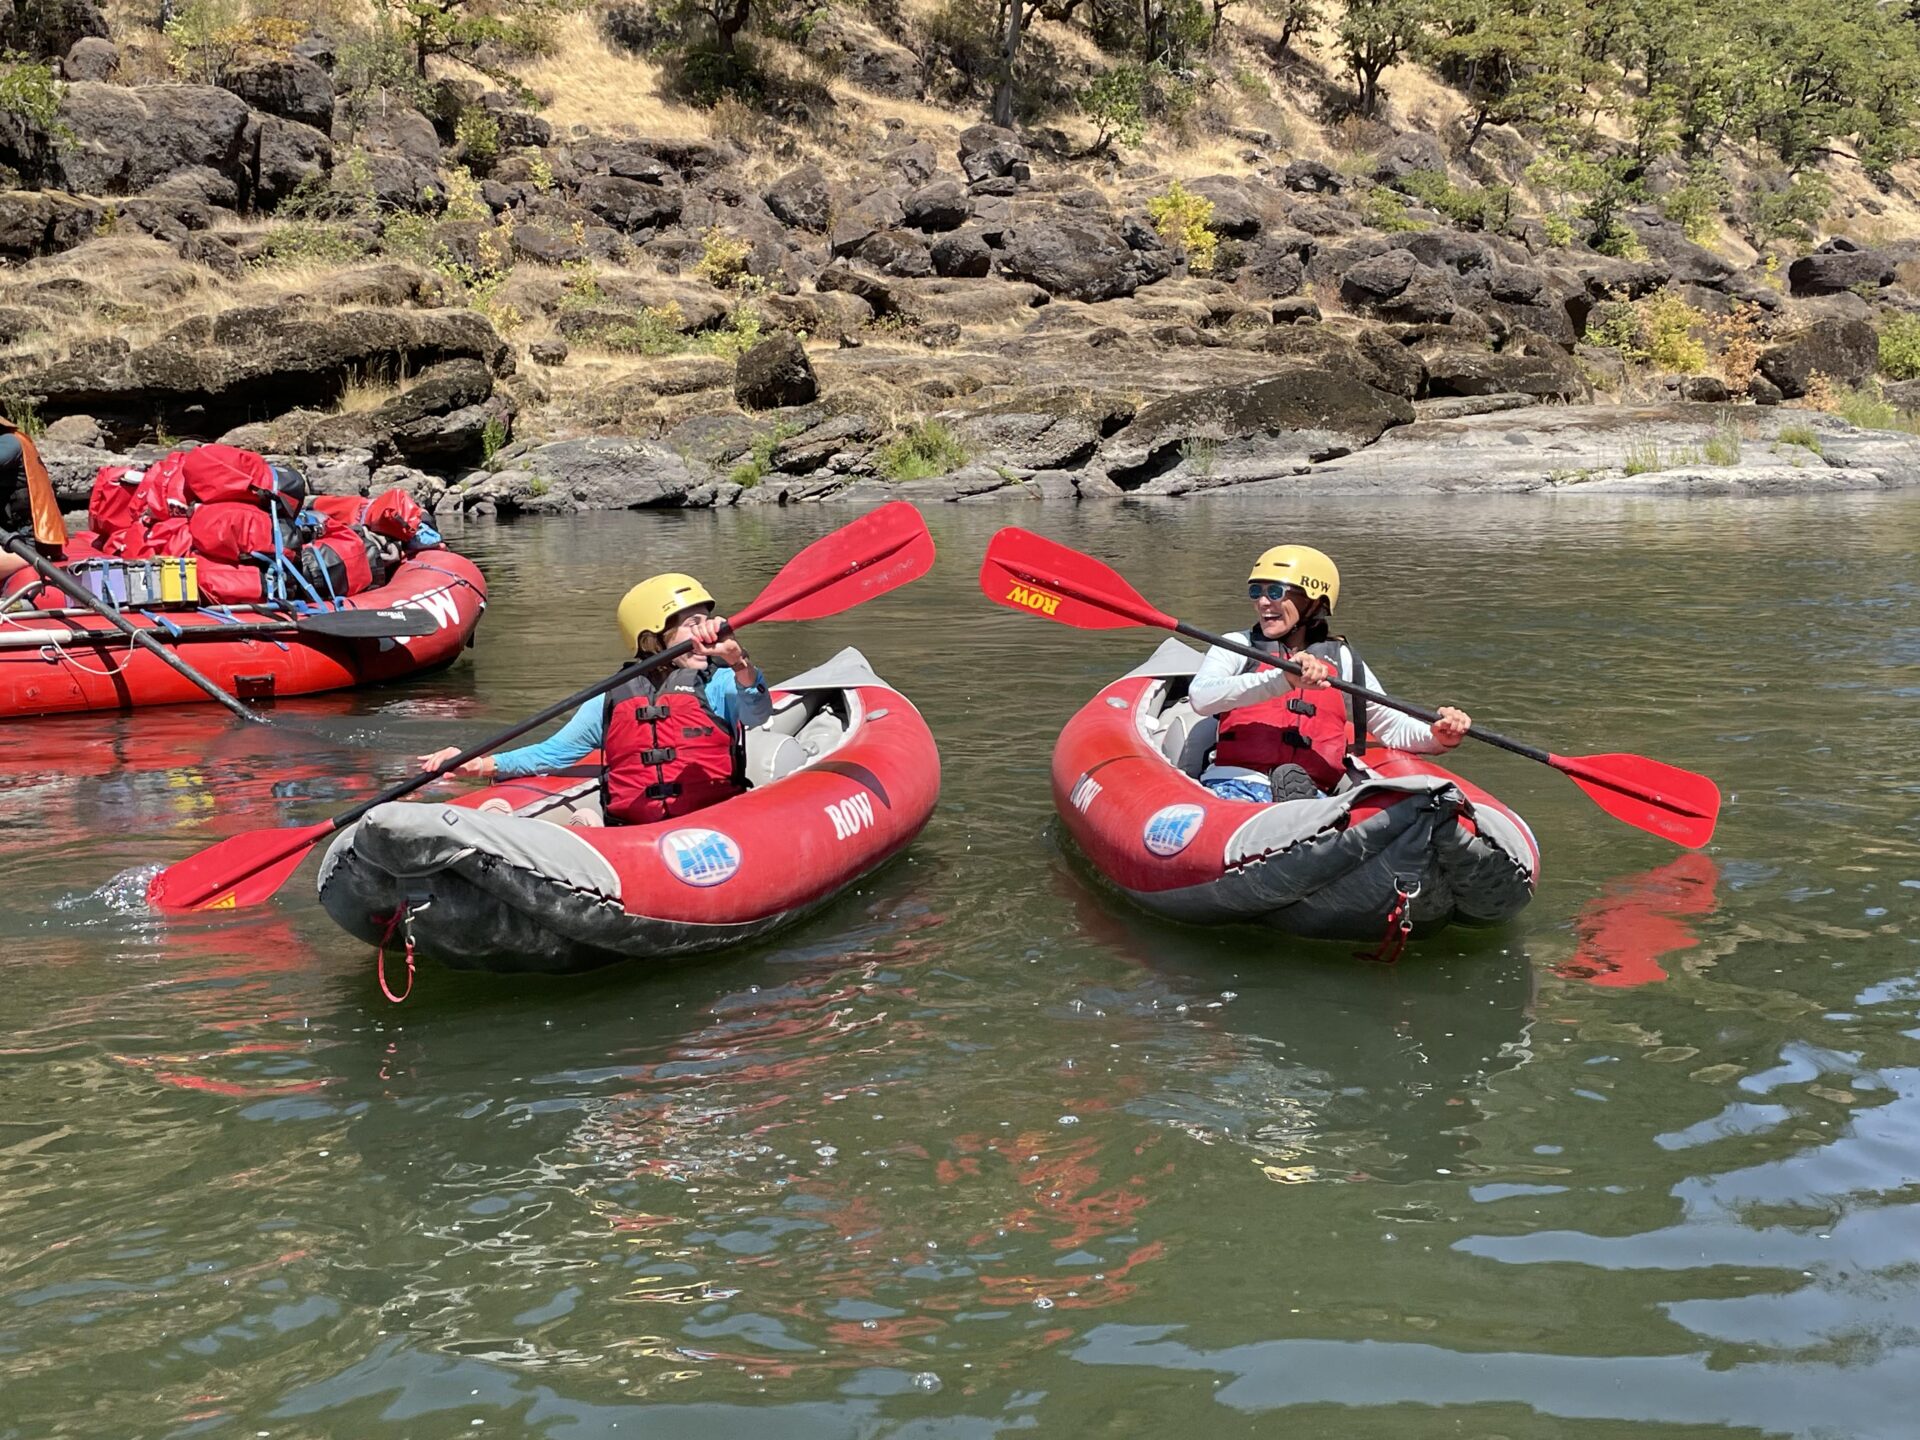 Multi-Day Paddling on the Wild & Scenic Rogue River